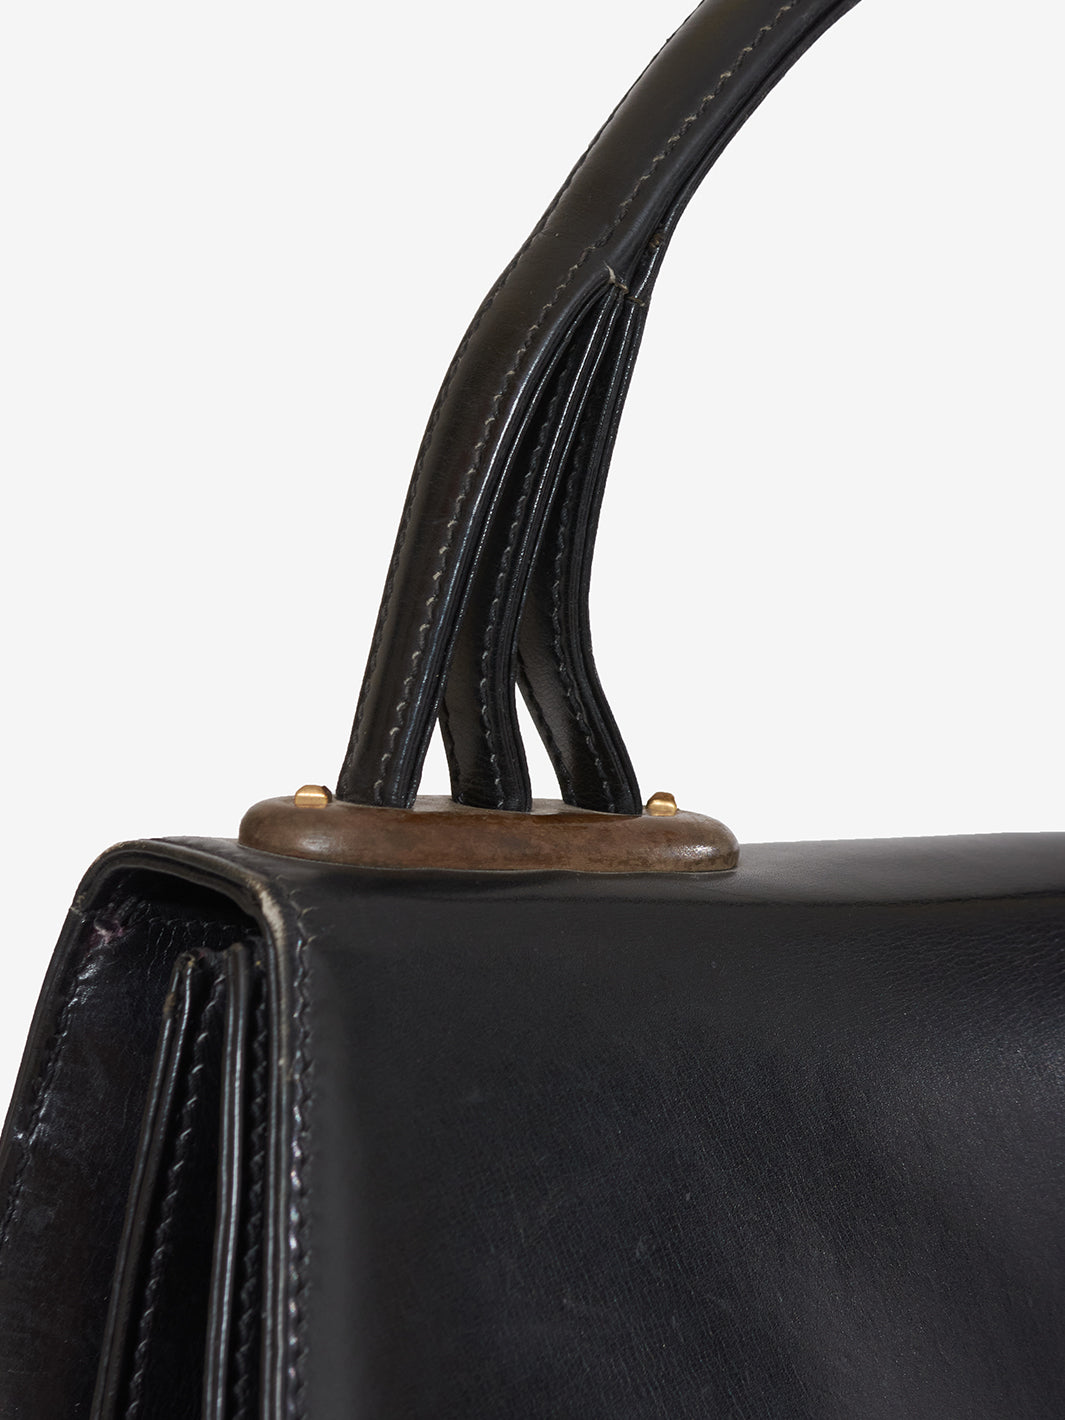 Gucci Black Leather Hand Bag